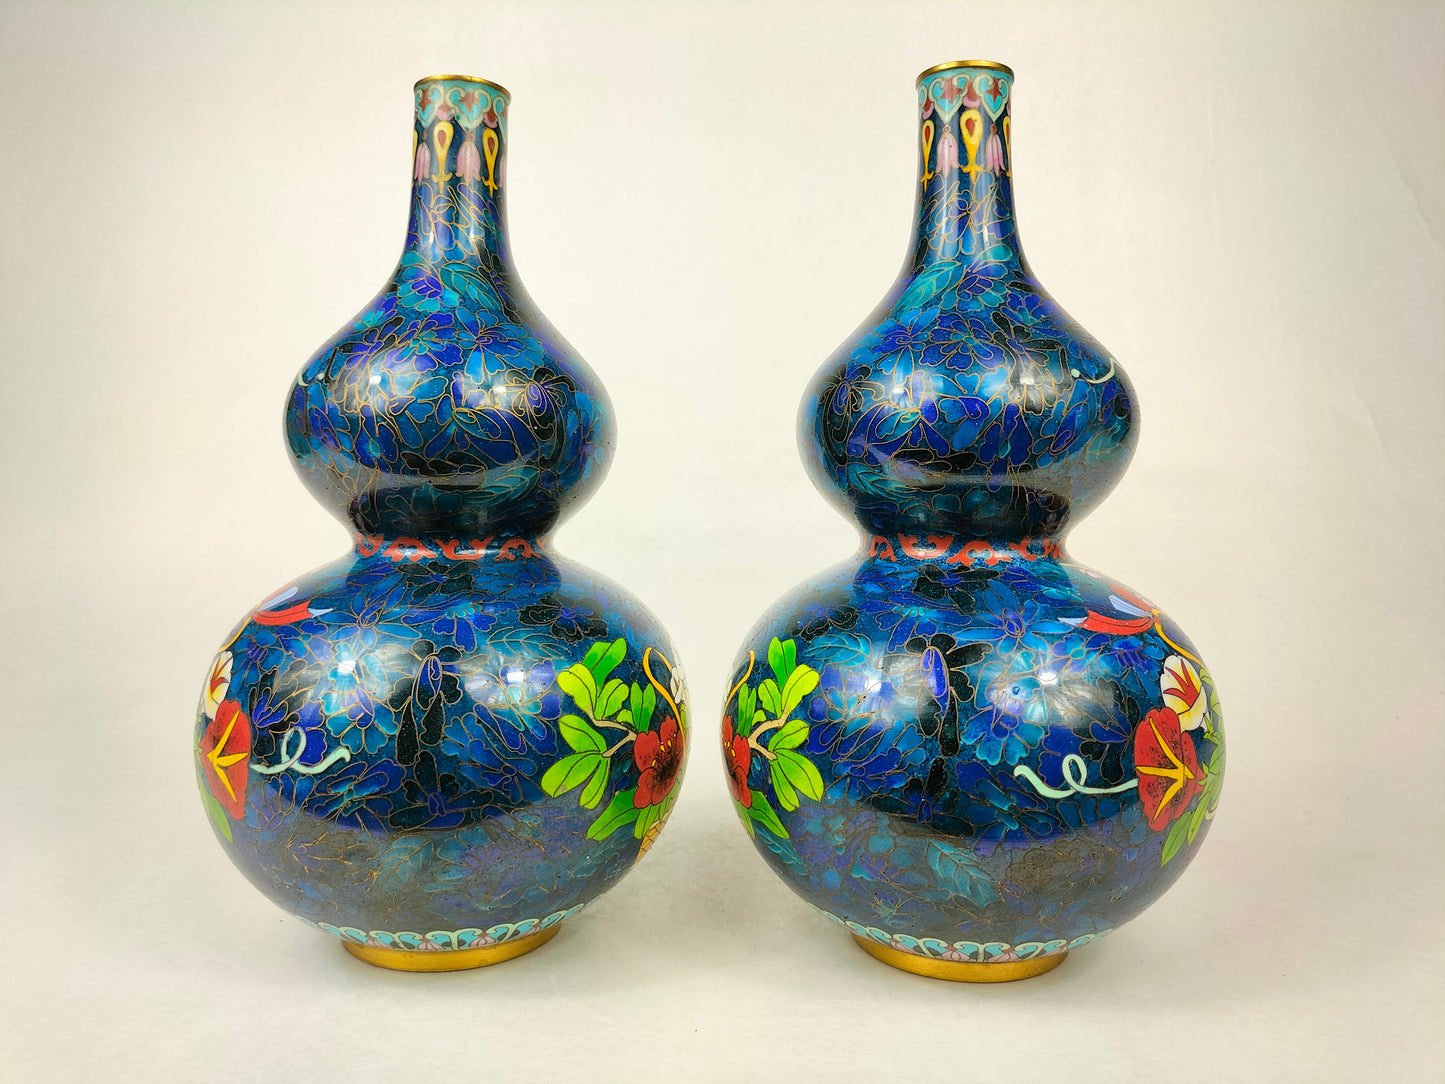 Pair of Chinese double gourd cloisonne vases decorated with flower baskets // 20th century